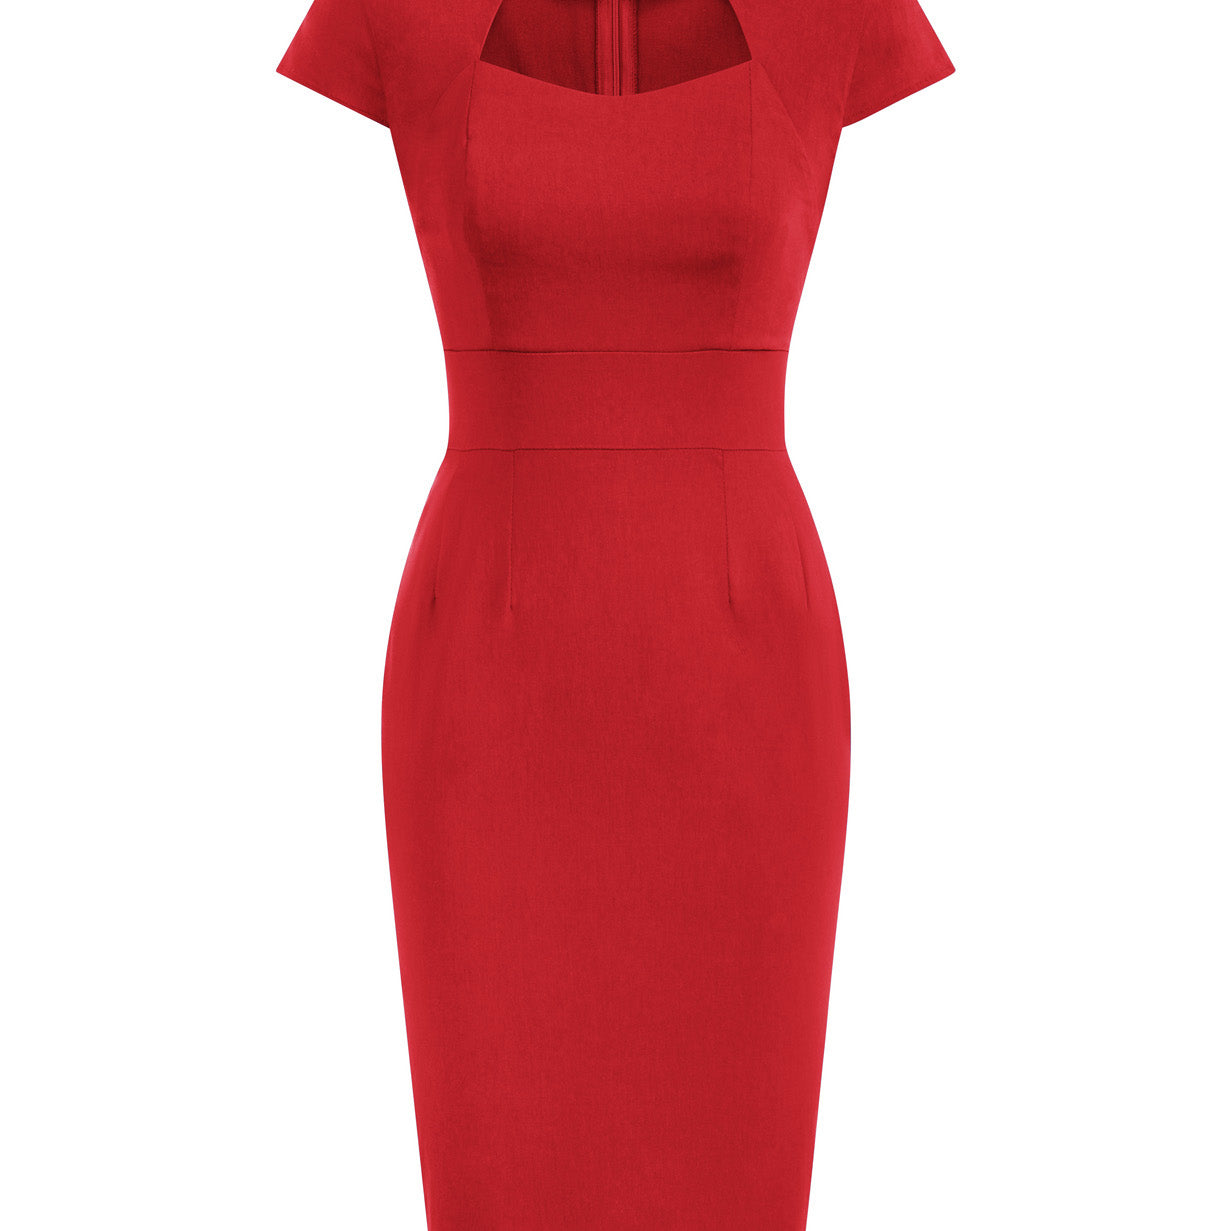 Vintage Cap Sleeve High Stretchy Hips-Wrapped Bodycon Pencil Dress